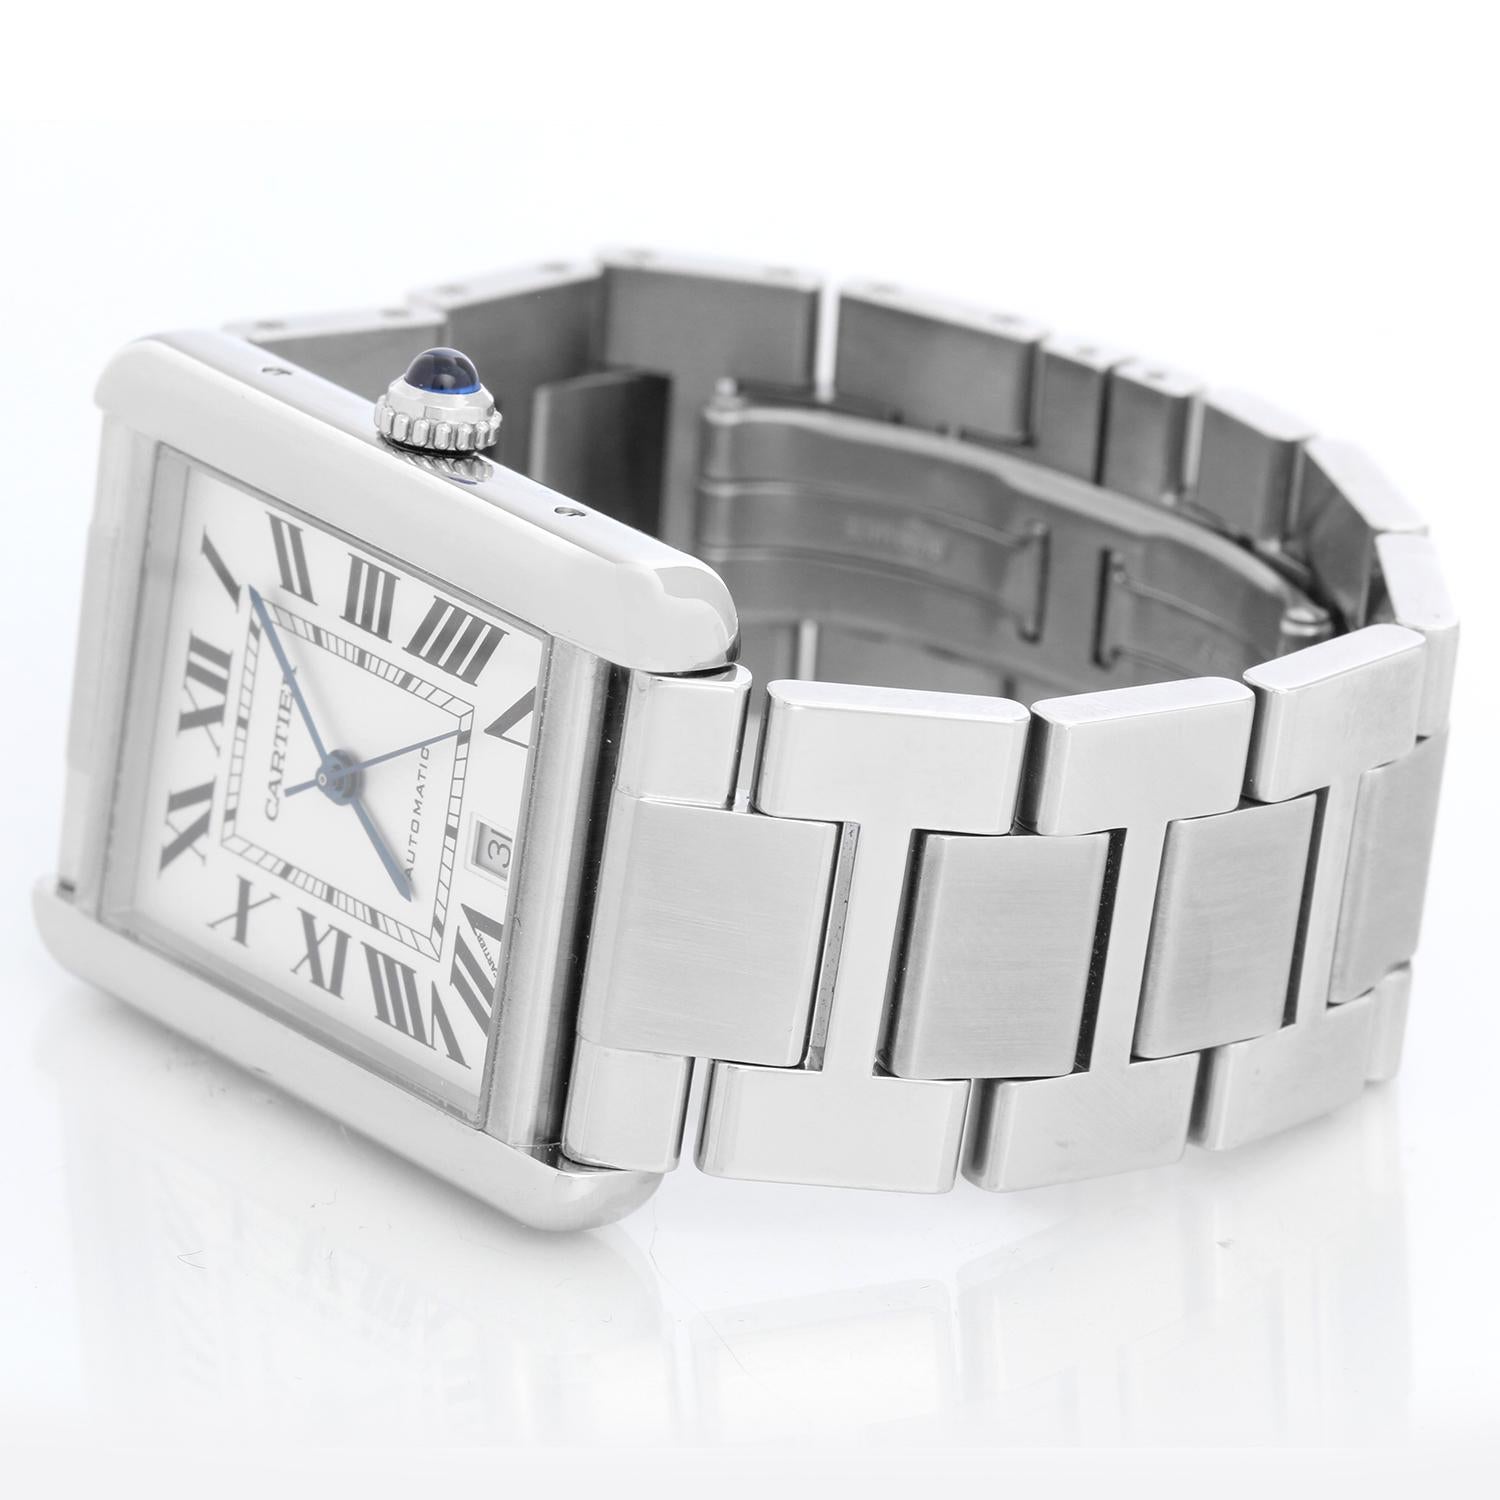 Cartier Tank Solo Stainless Steel XL WSTA0053 3800 - Automatic. Stainless steel  (31 x 41mm). Silver dial with black Roman numerals with date at 6 o'clock. Stainless Steel Cartier bracelet; will fit a 7 inch wrist . Pre-owned with custom box.